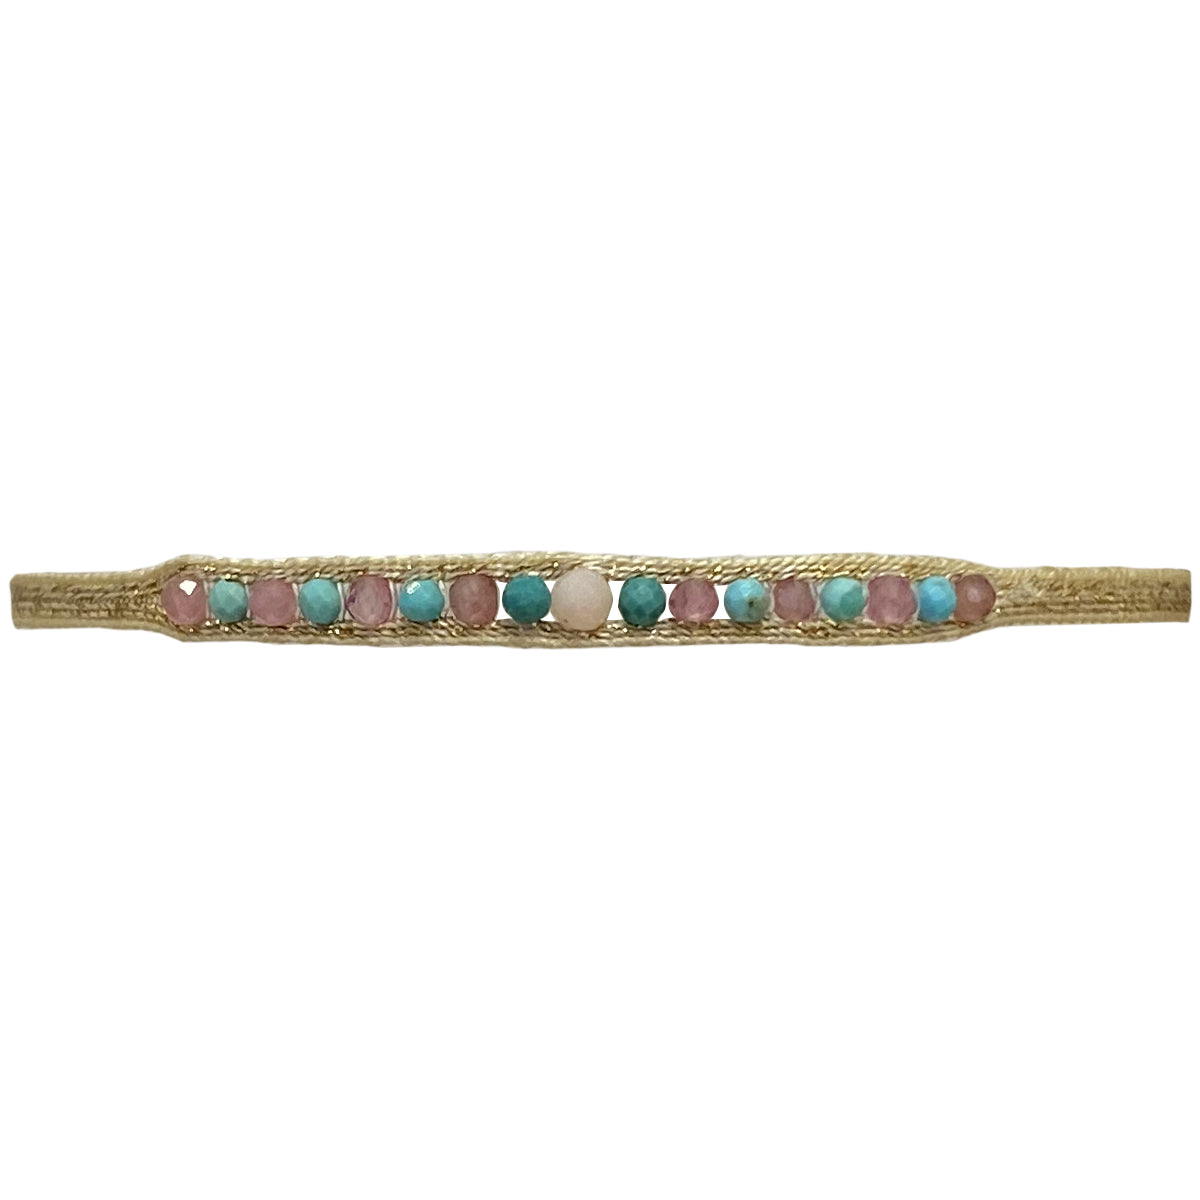 This LeJu bracelet has been handwoven in Colombia by our team of artisans using polyester threads featuring pink opal, turquoise and pink tourmaline stones.  A delicate bracelet in an elegant design. This handmade beauty is the perfect gift for someone special.  Details:  - Pink opla, turquoise and pink toumaline semi-precious stones  - Handwoven using polyester threads  - Width 3mm  -Women bracelet  - Adjustable bracelet  -Can be worn in the  water